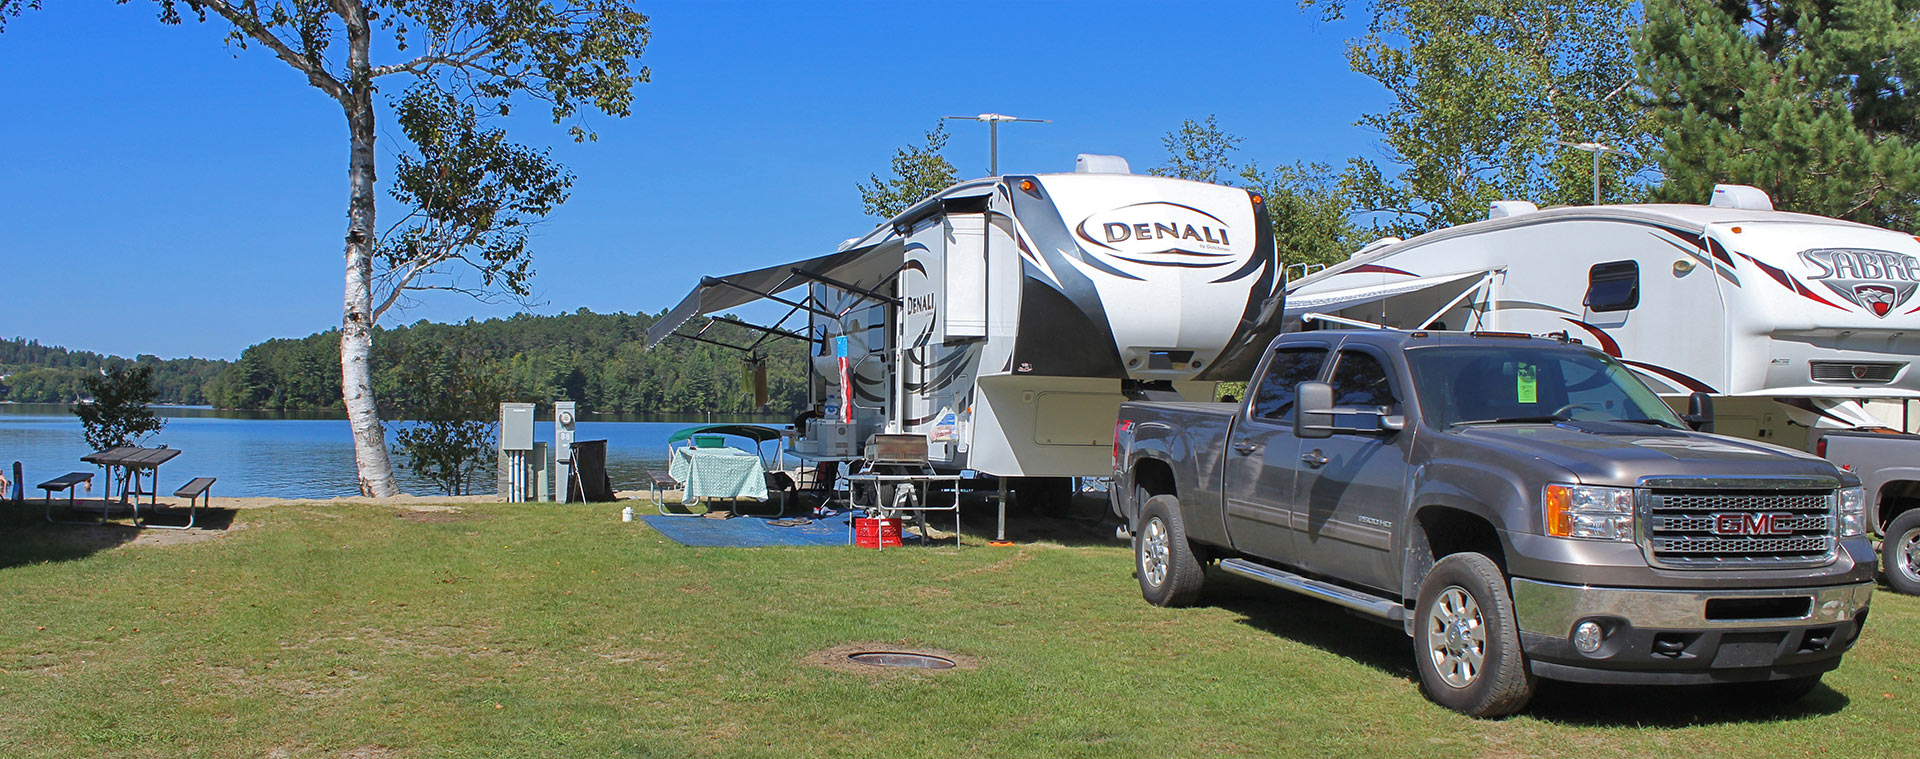 Lakeside Camping RV Site